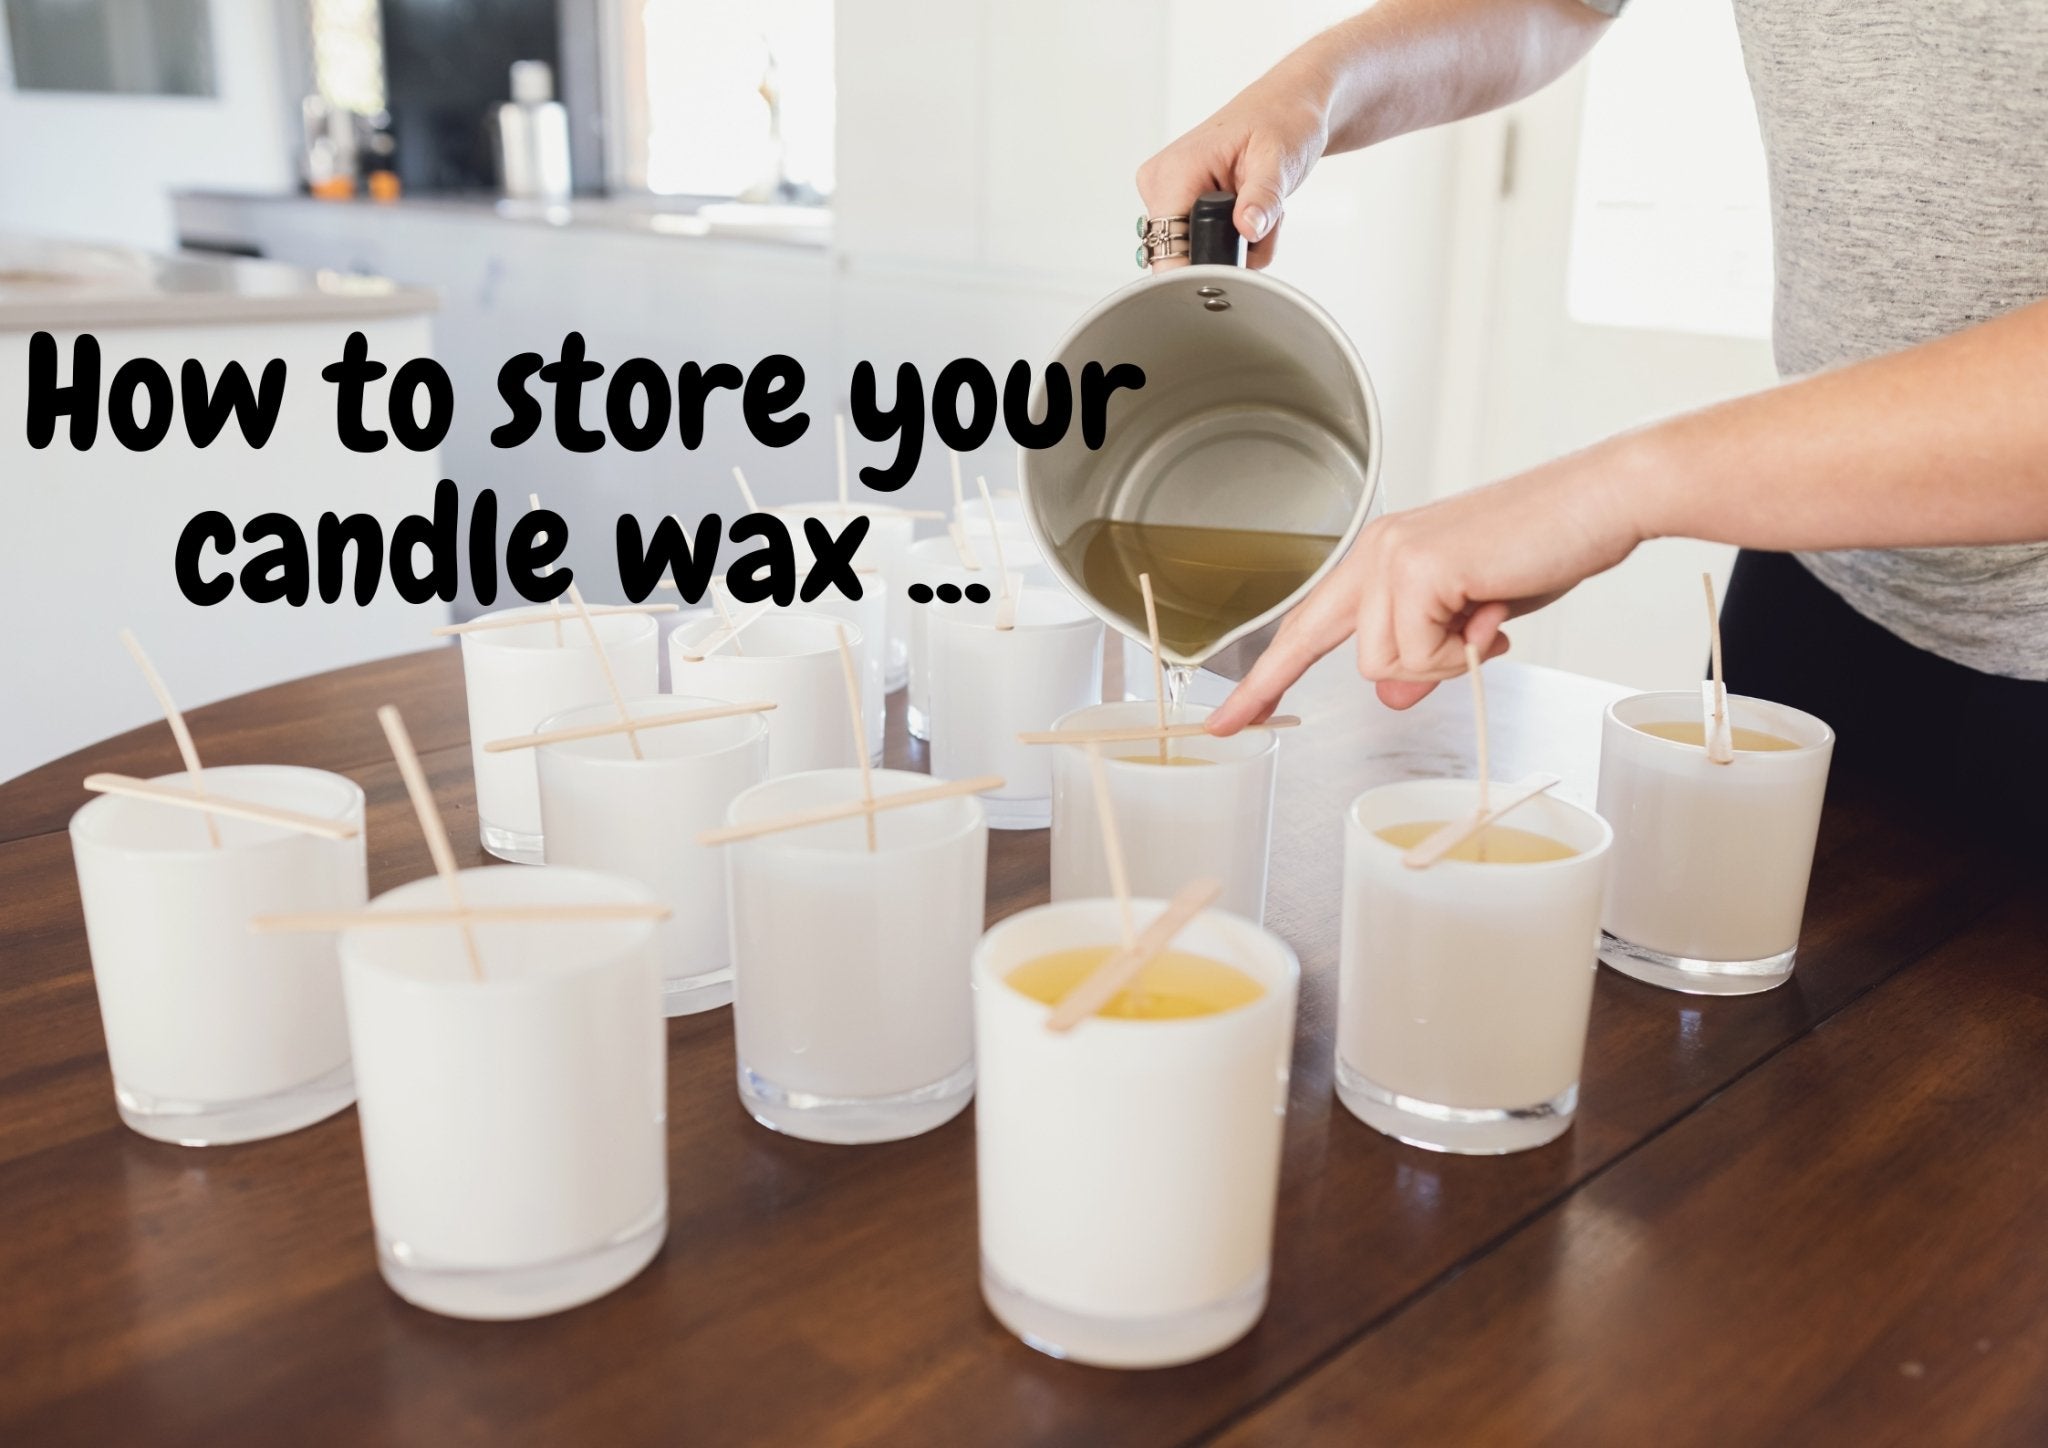 How to store candle wax? - Suffolk Candles